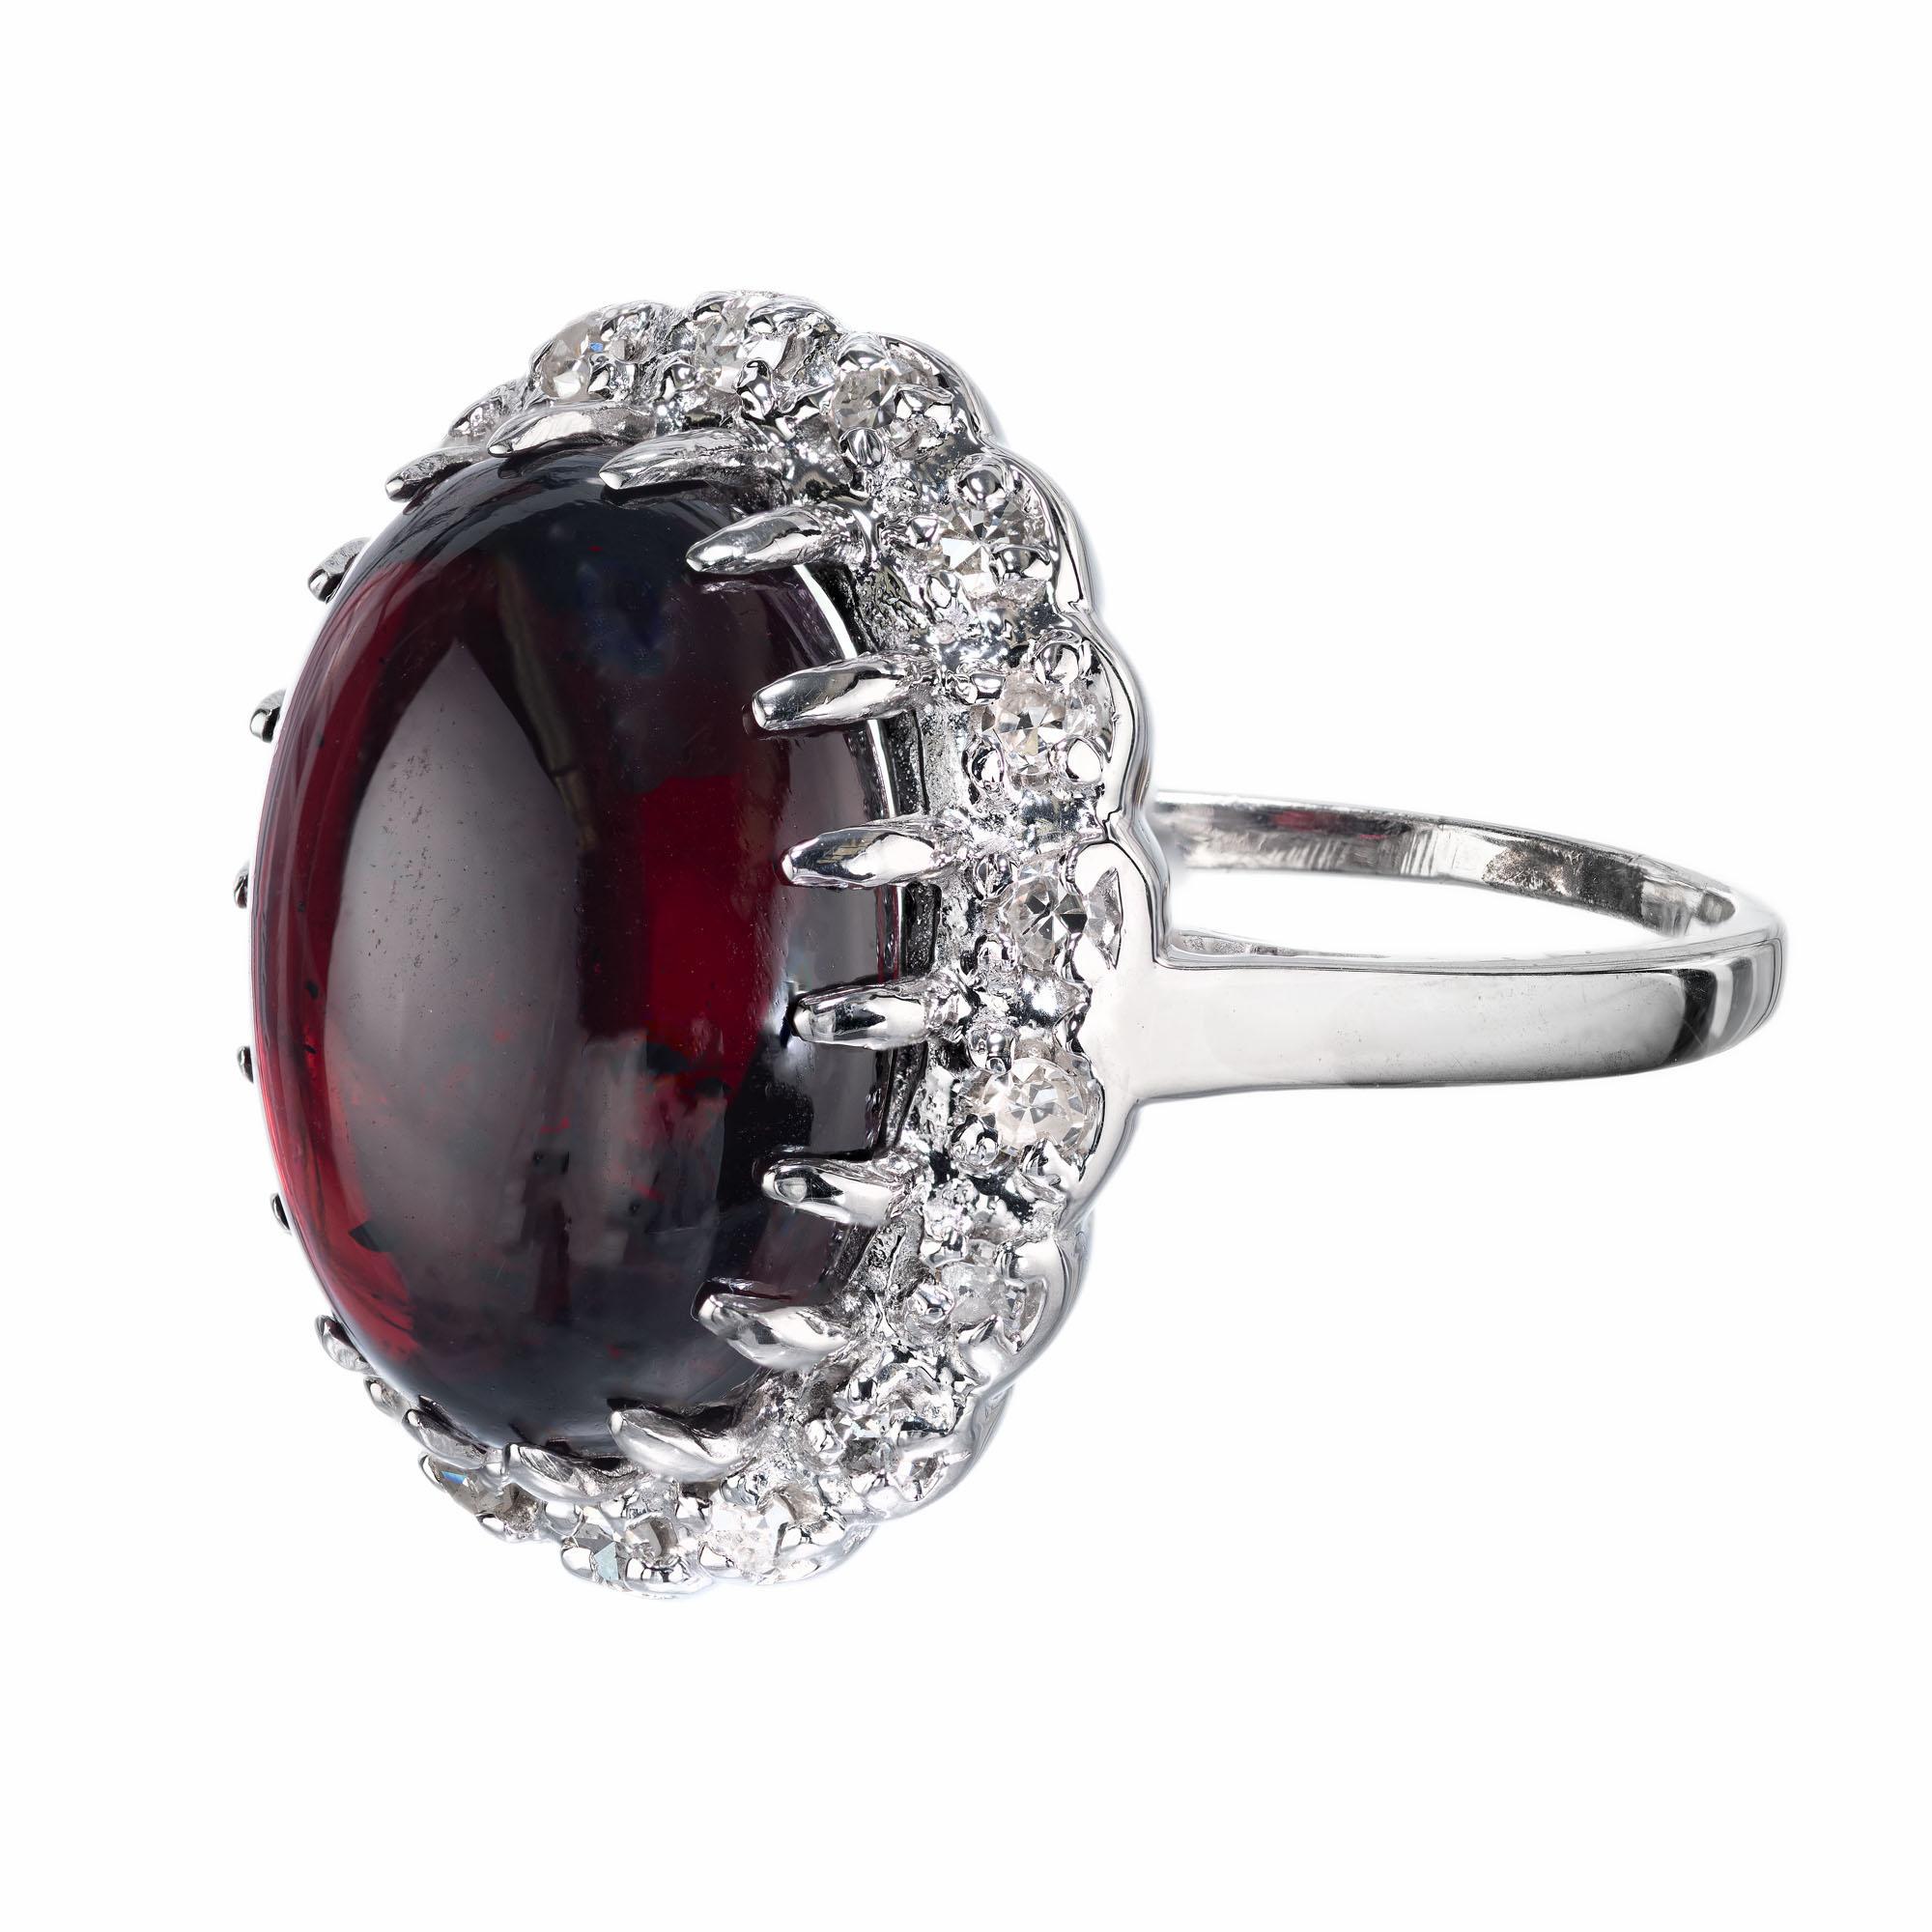 Cabochon garnet of translucent reddish-brown color surrounded by a bright white diamond halo in a 14k white gold setting.  Circa 1940-1950

1 oval reddish-brown garnet with natural inclusions, approx. 13.75cts
18 round single cut diamonds, H VS-SI